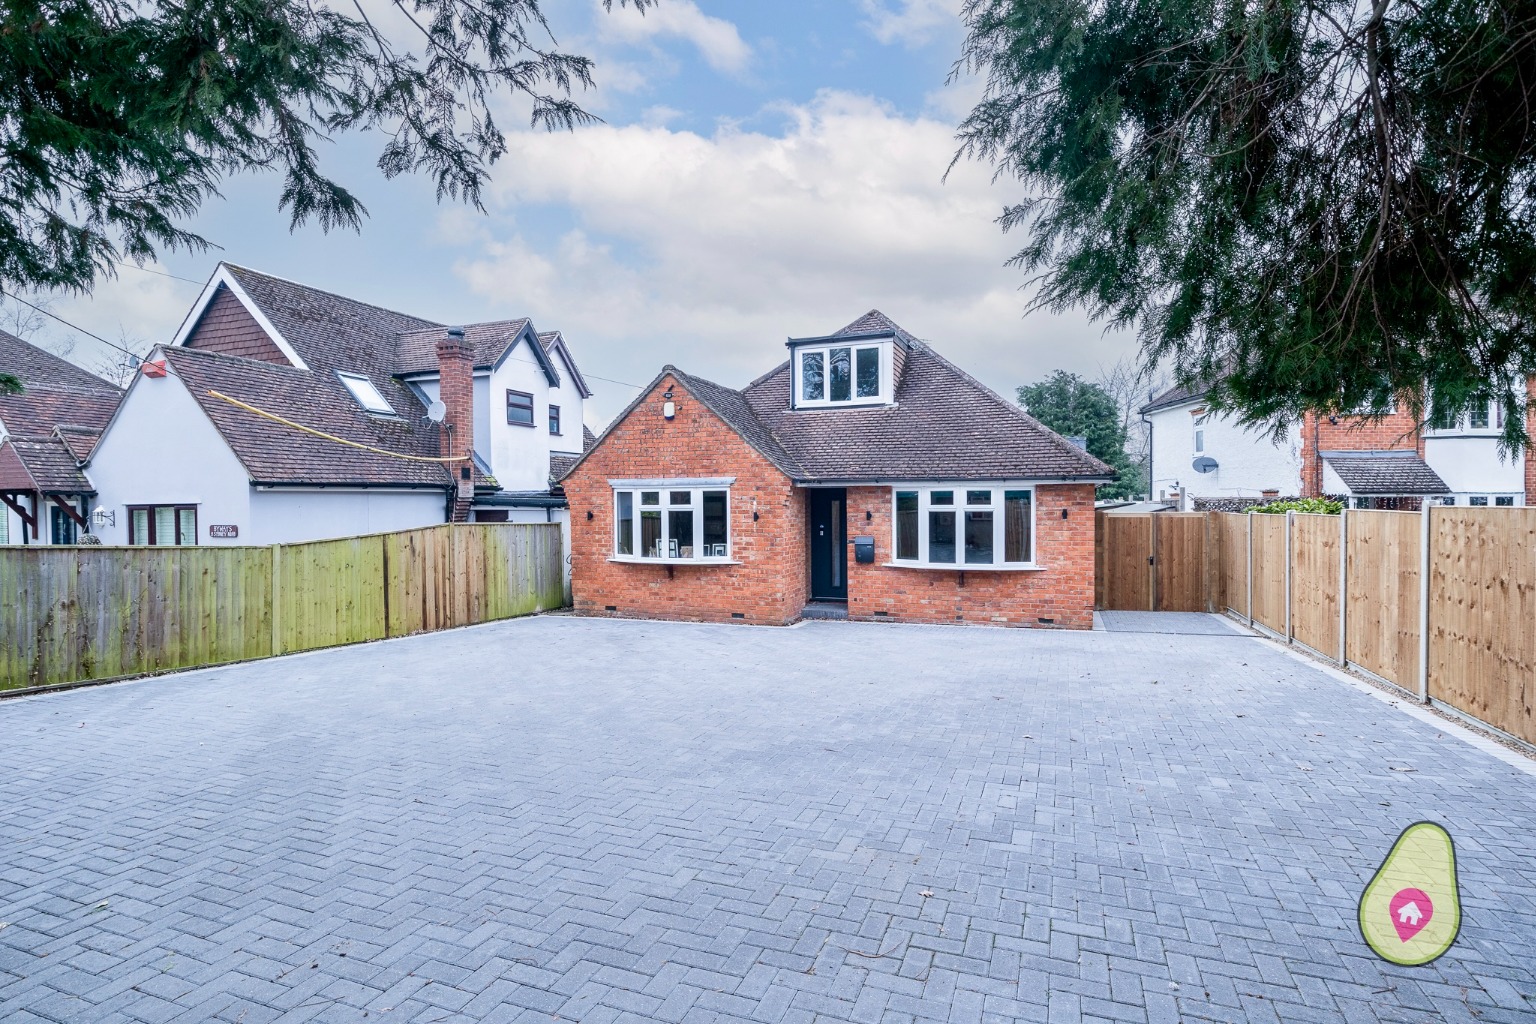 4 bed detached house for sale in Stoney Road, Bracknell  - Property Image 1